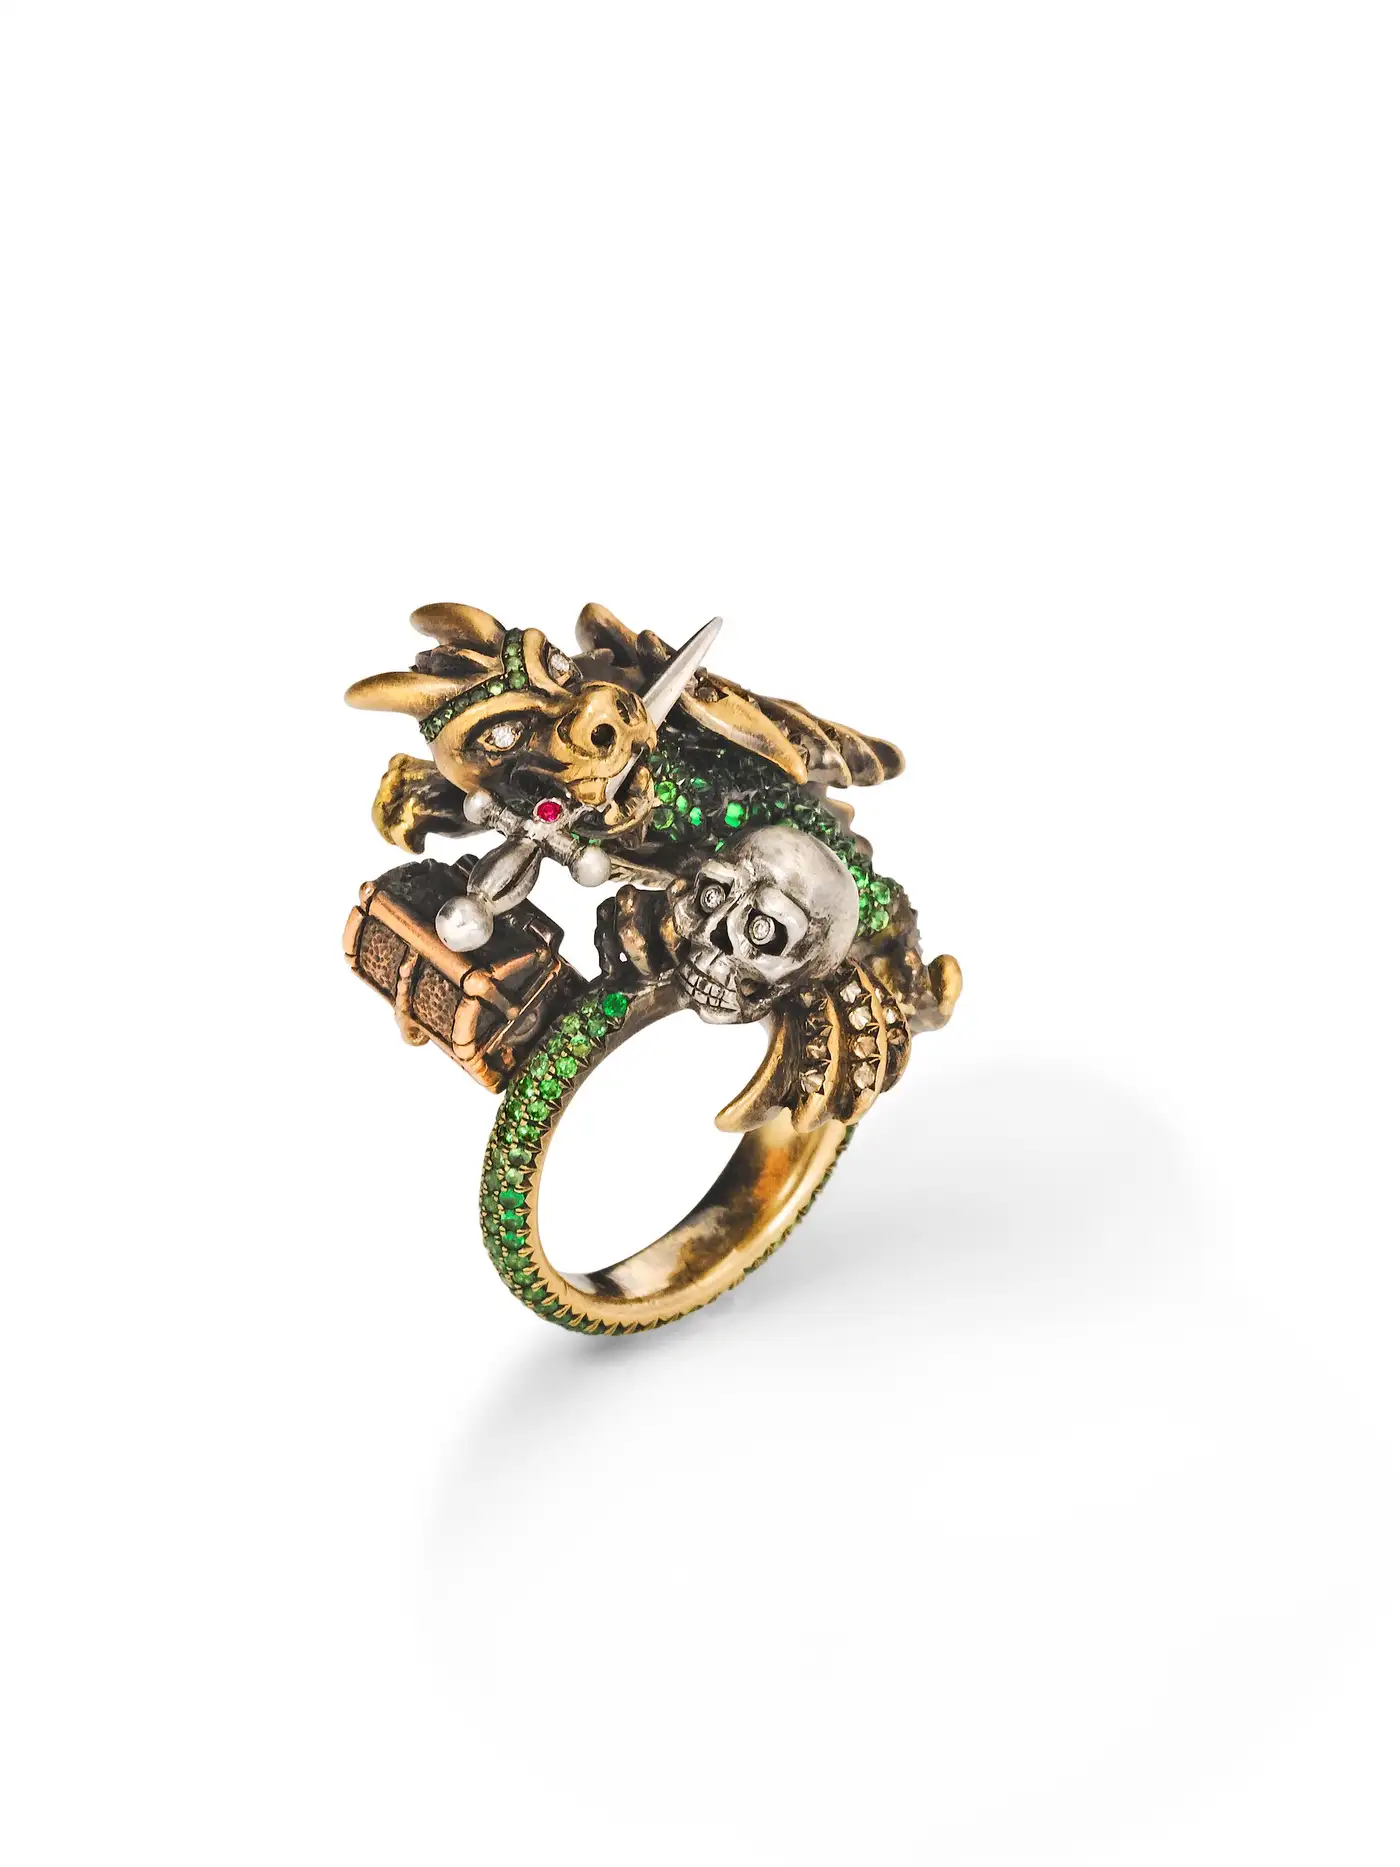 Wendy-Brandes-7-Ring-Diamond-and-Coloured-Gemstone-Animal-Design-Collection-4.webp